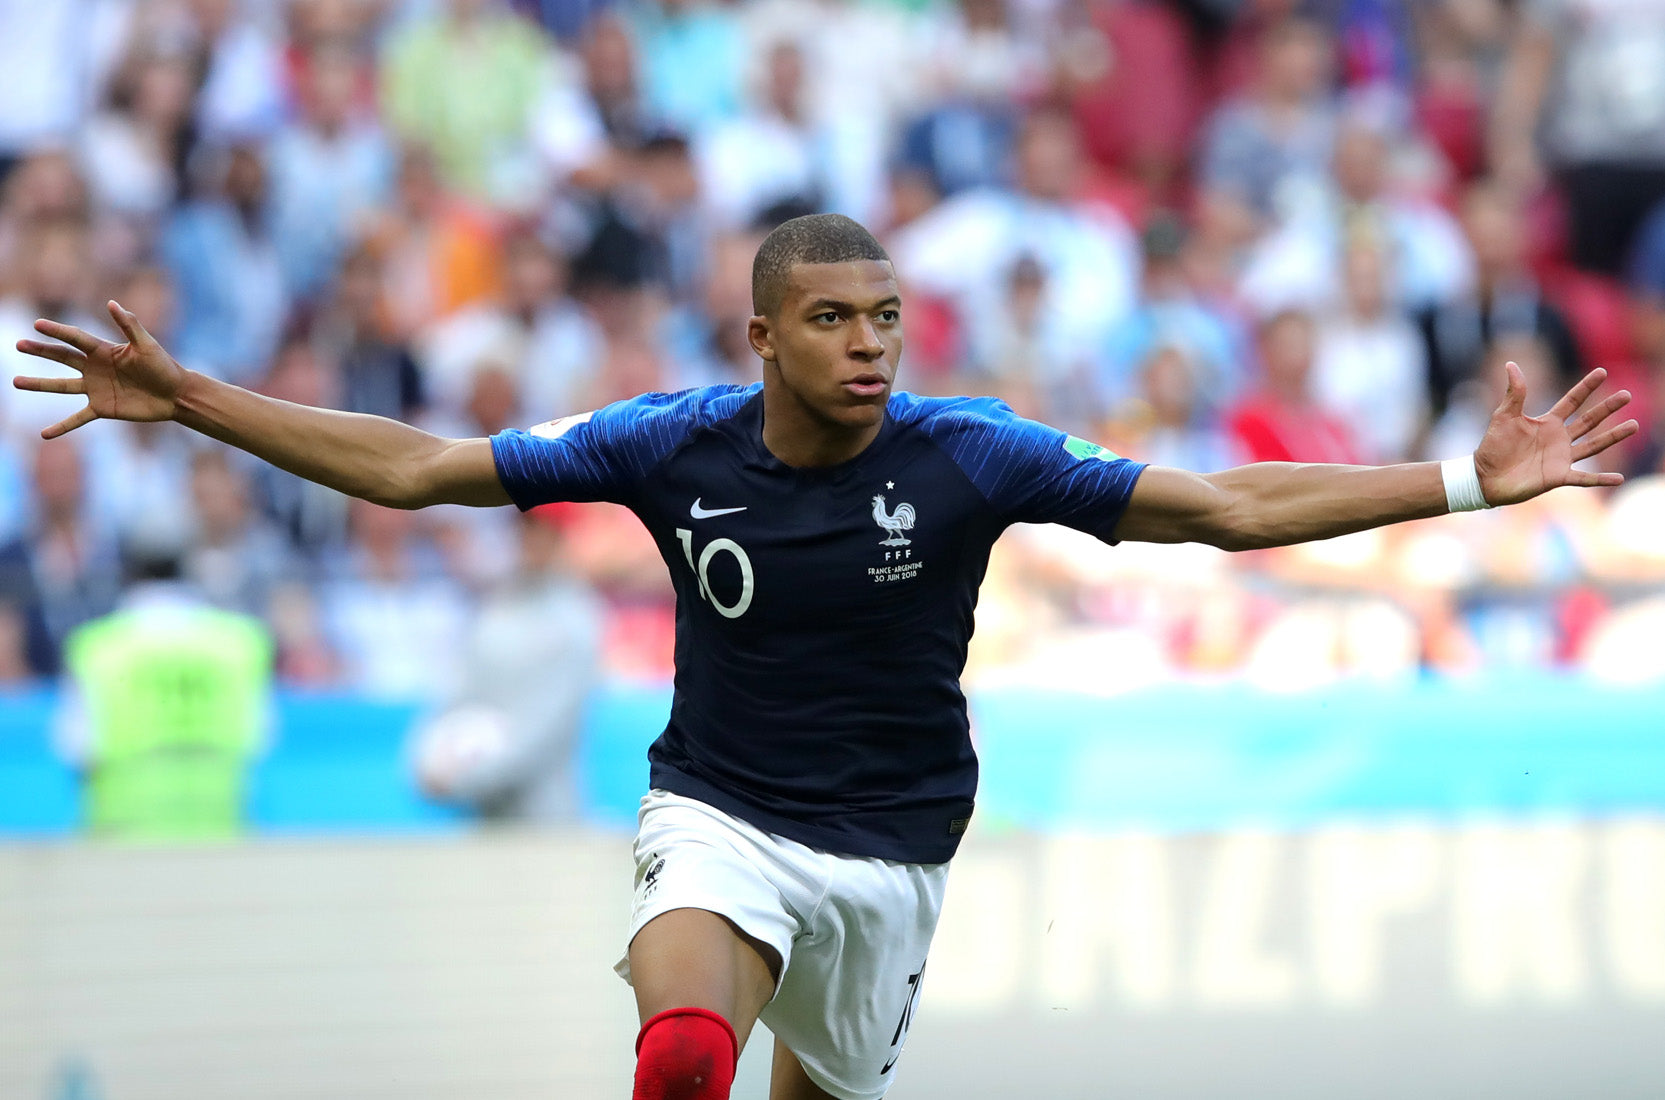  Kylian Mbappe, a French soccer player, is in action on the field during a match.